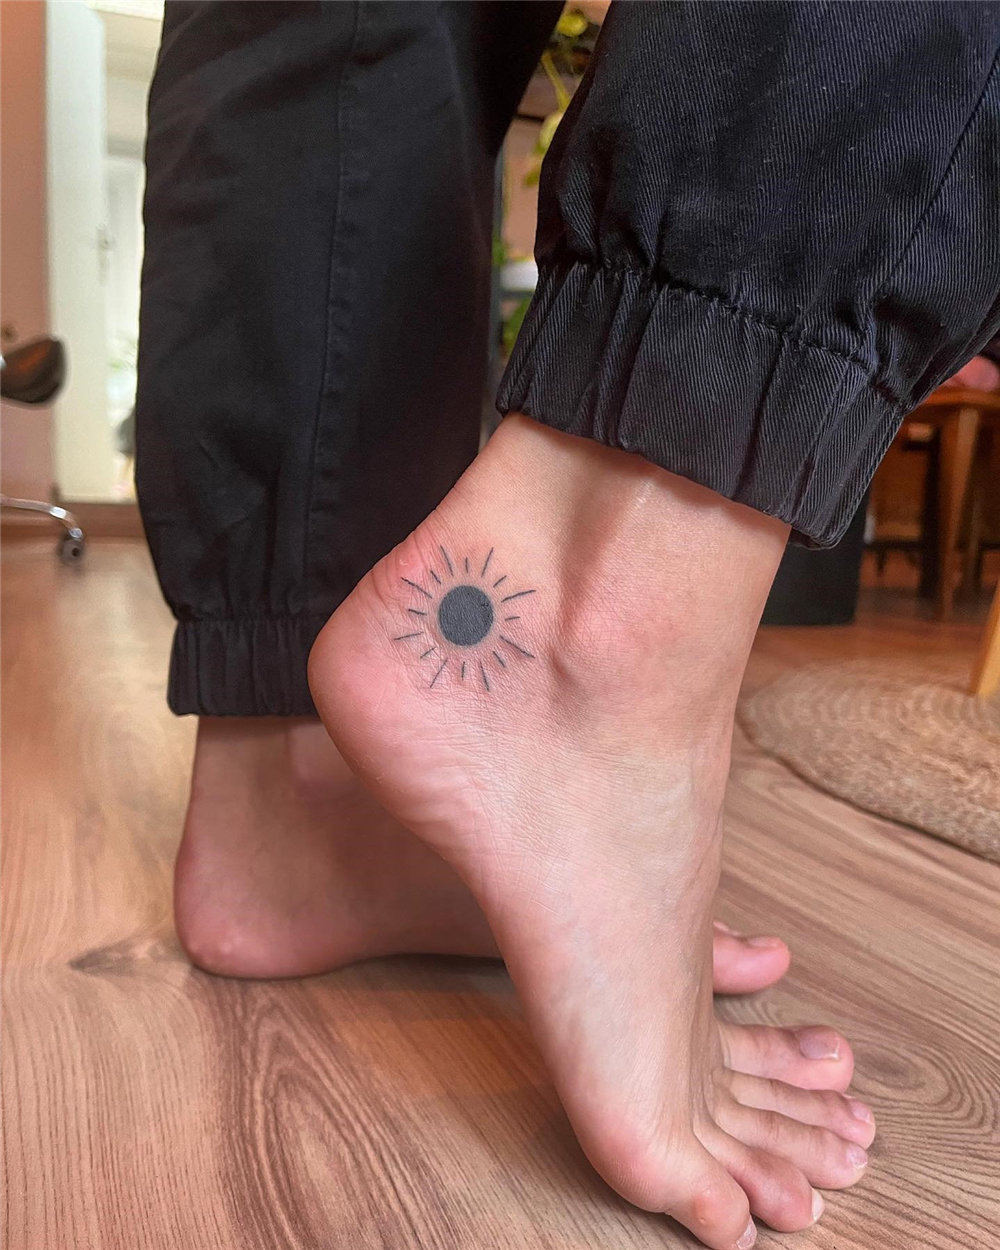 Ankle Tattoos for Women